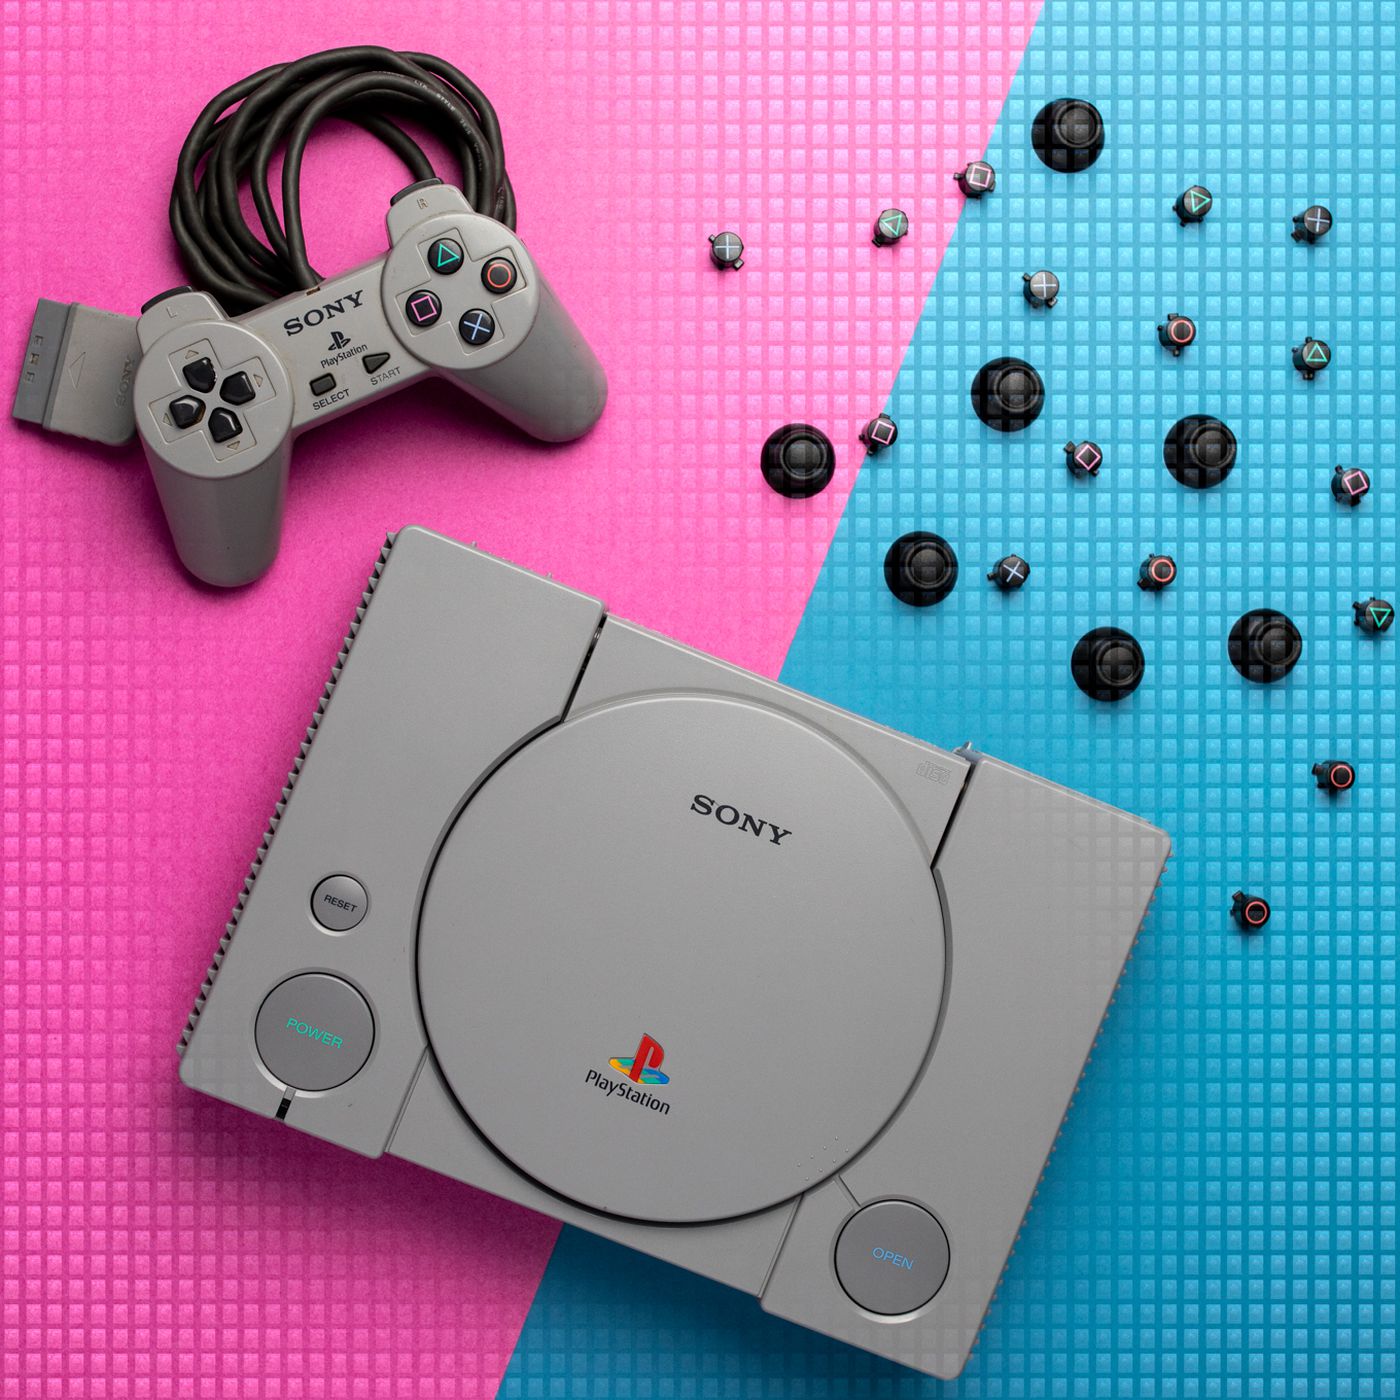 betale sig krone Kakadu How to play classic PlayStation games in 2019 - The Verge